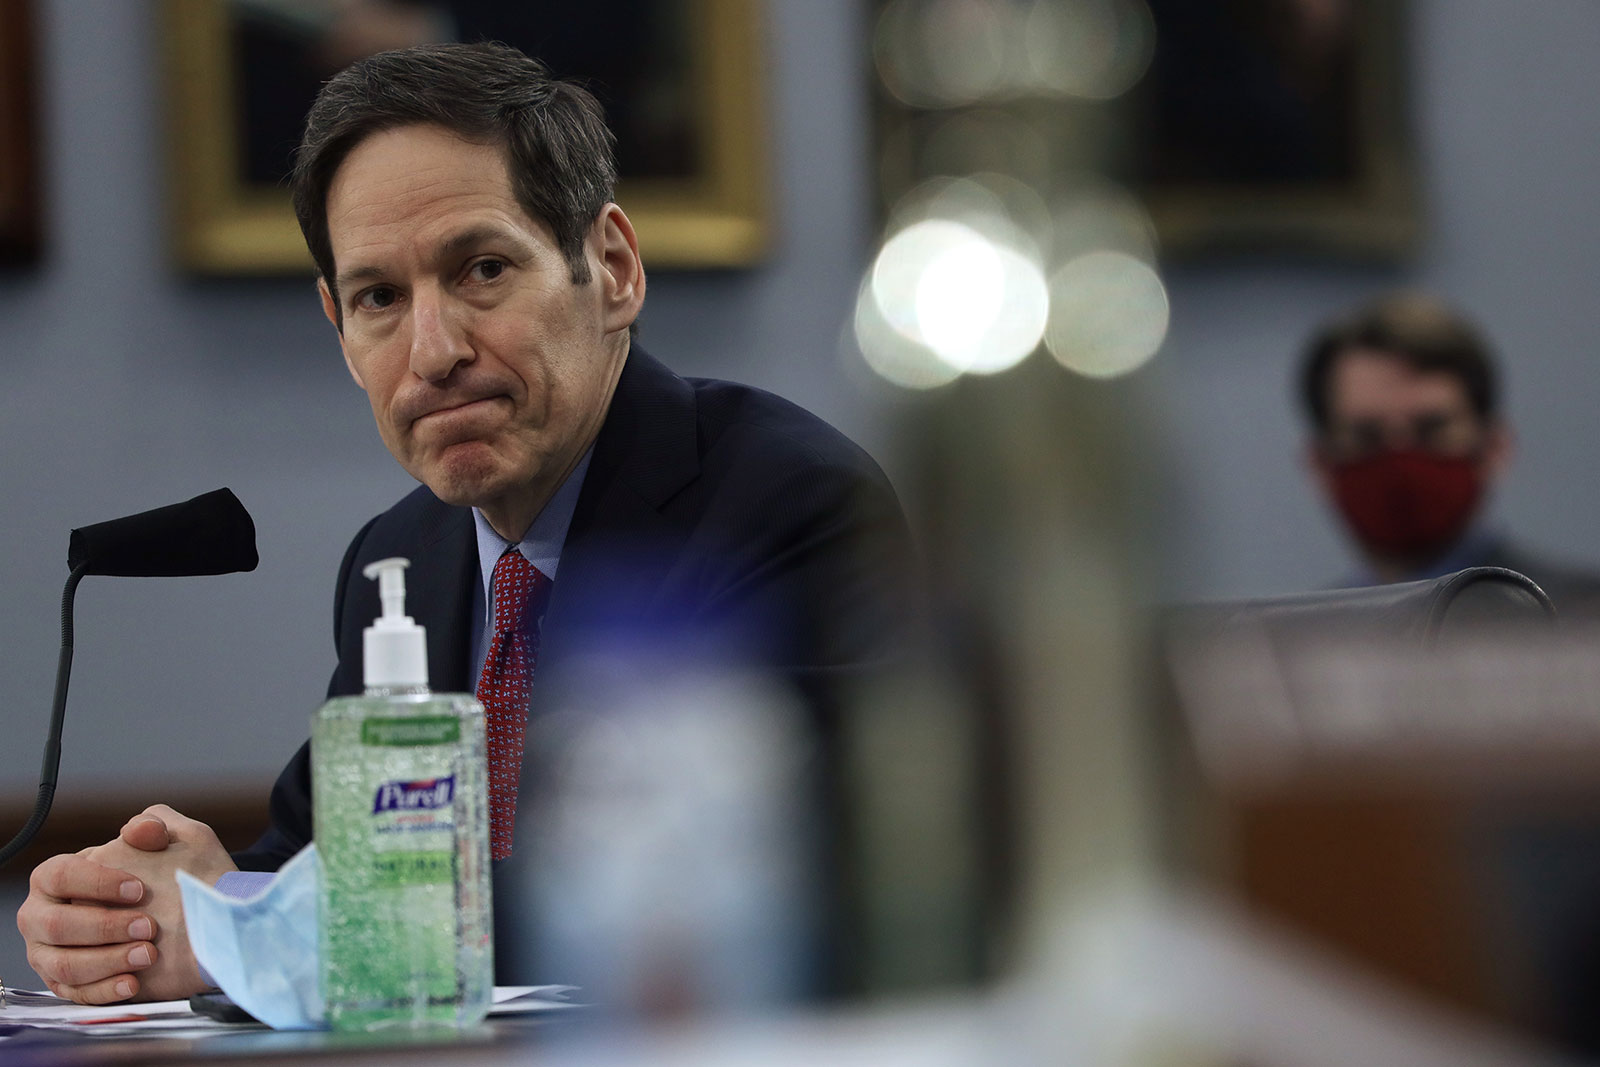 US Centers for Disease Control and Prevention Director Dr. Tom Frieden testifies during a House subcommittee hearing on Covid-19 in Washington, DC, in May.